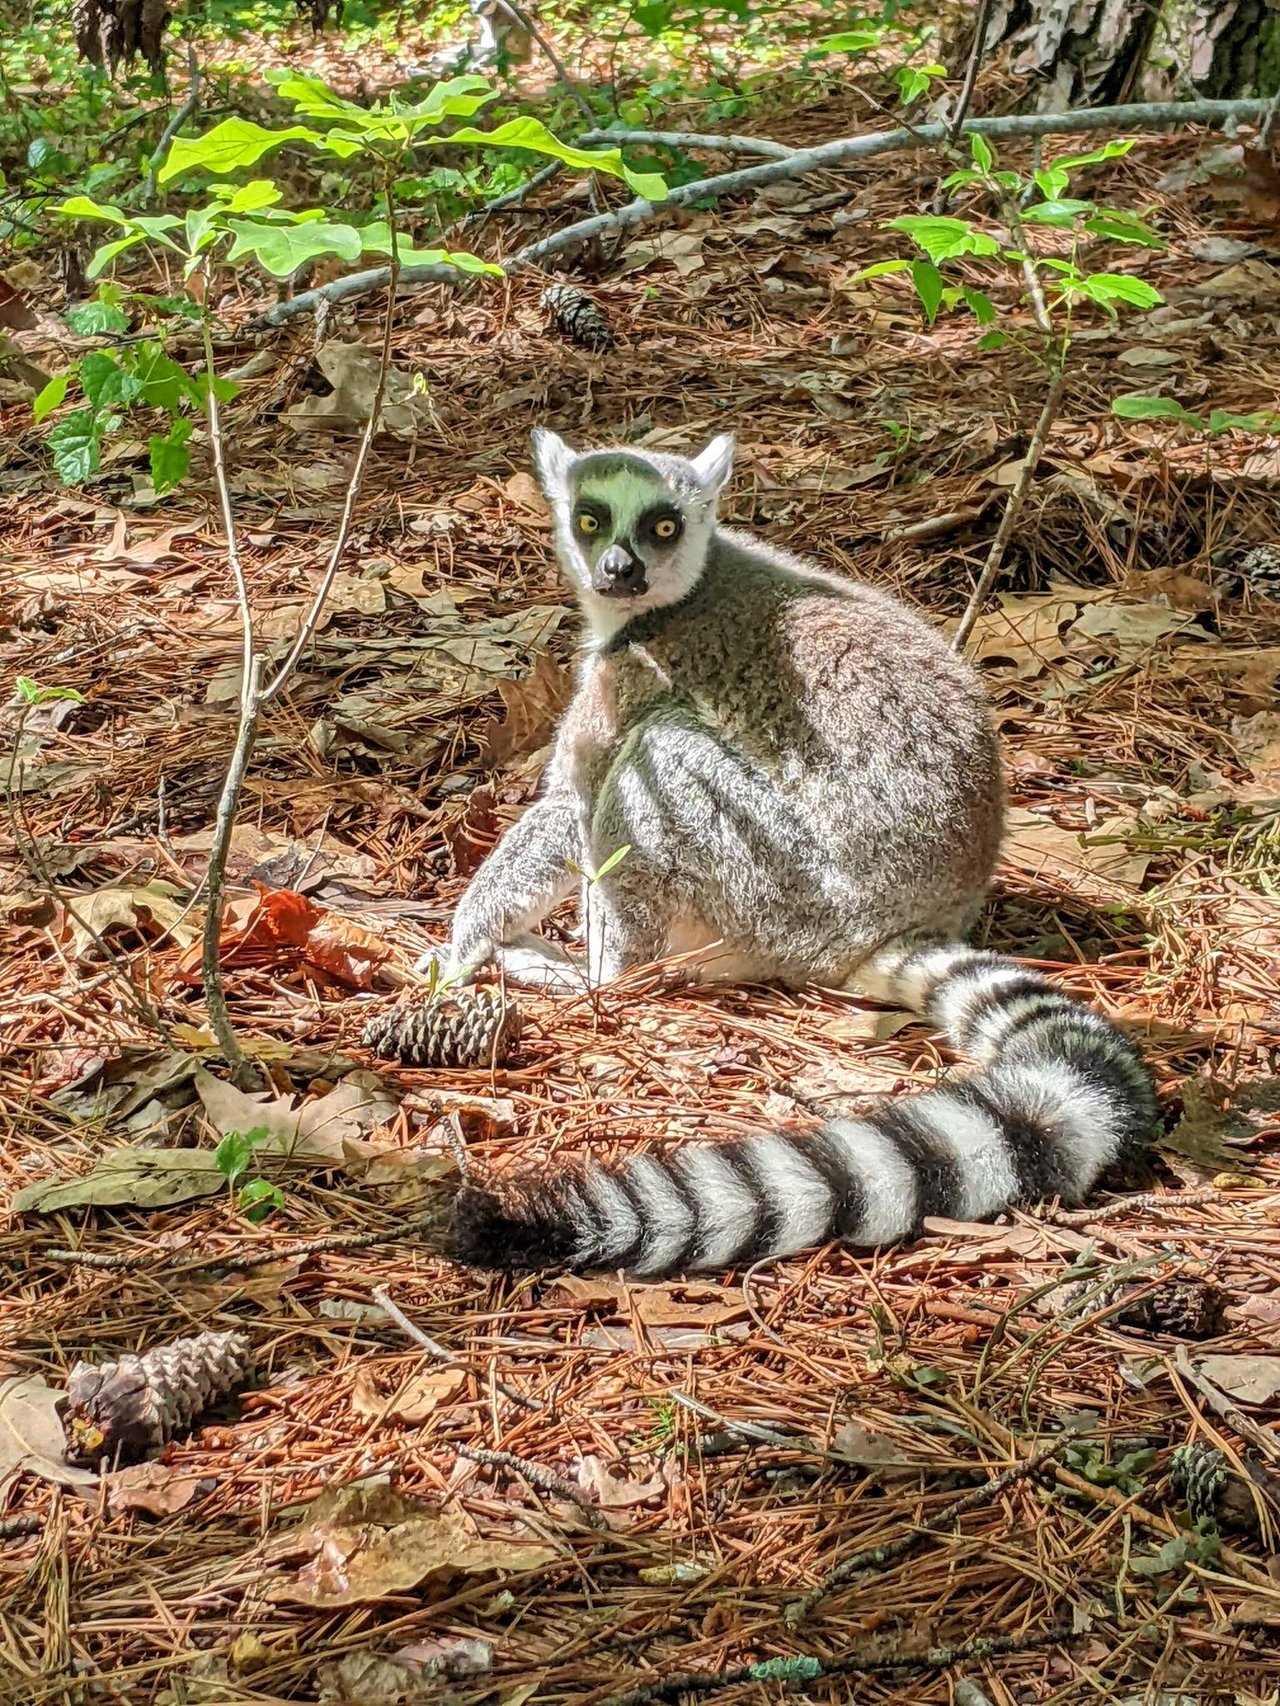 a ring-tailed lemur sits on a leafy forest floor